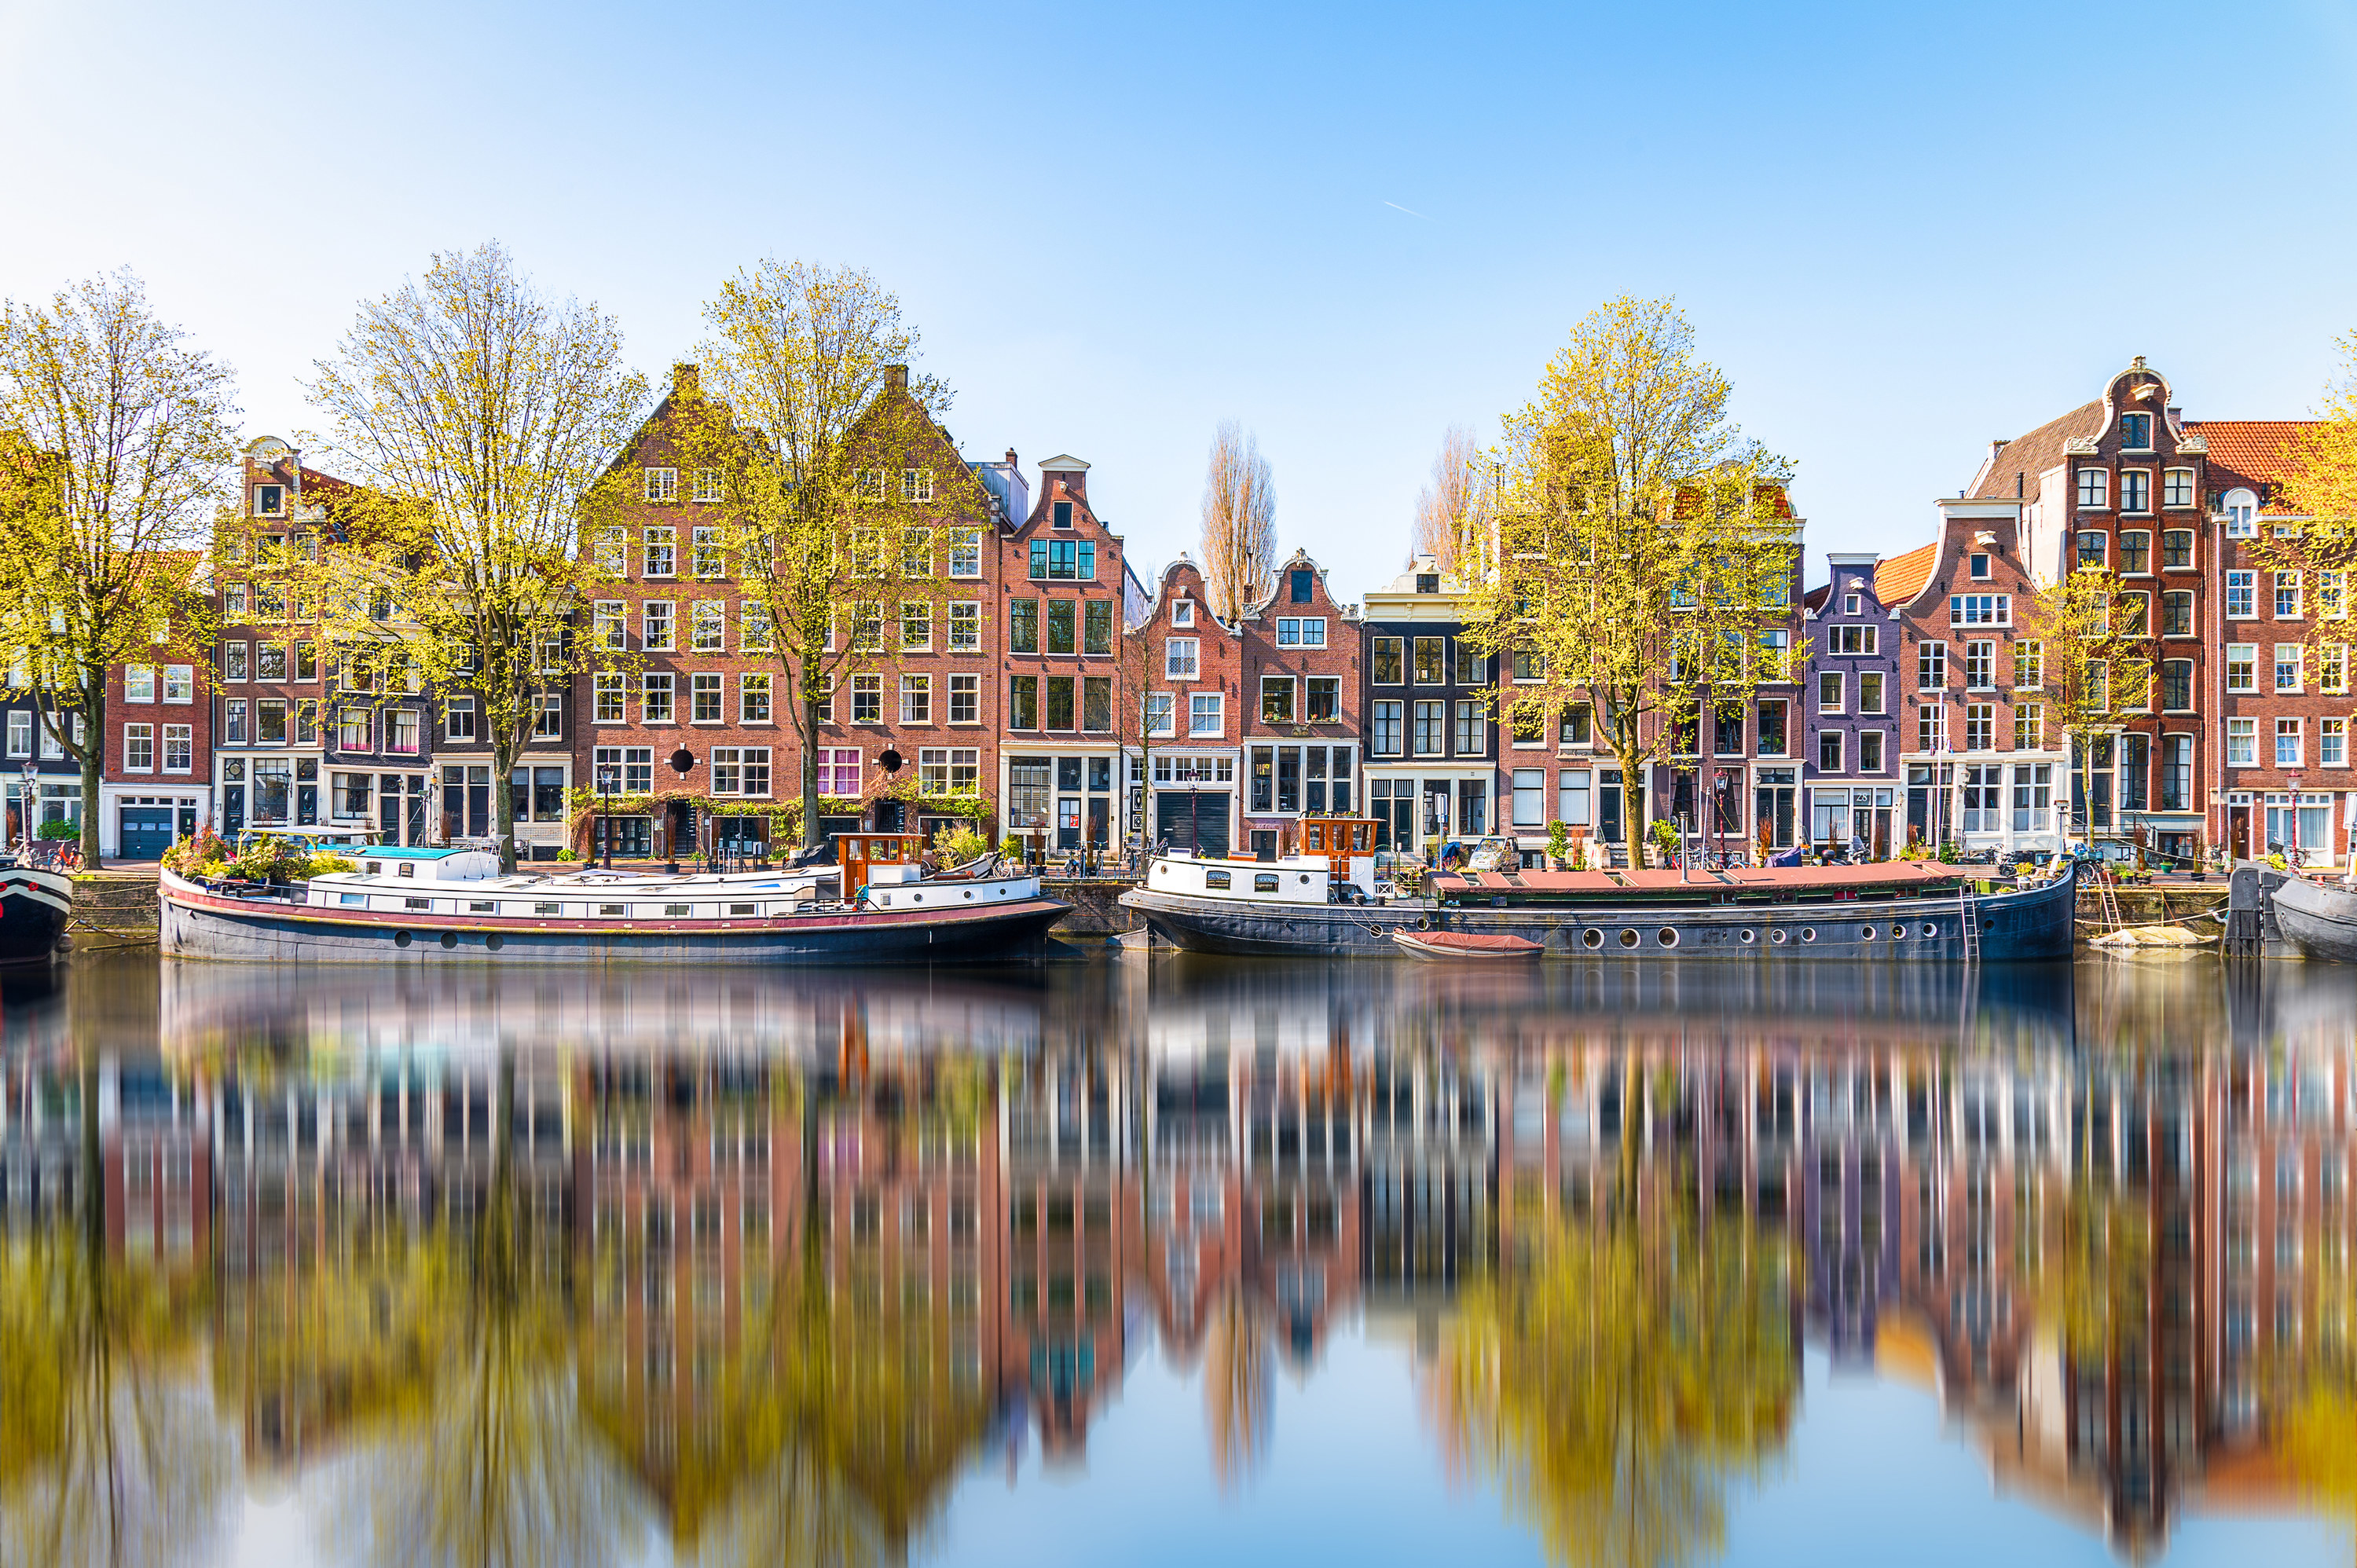 An image of Amsterdam